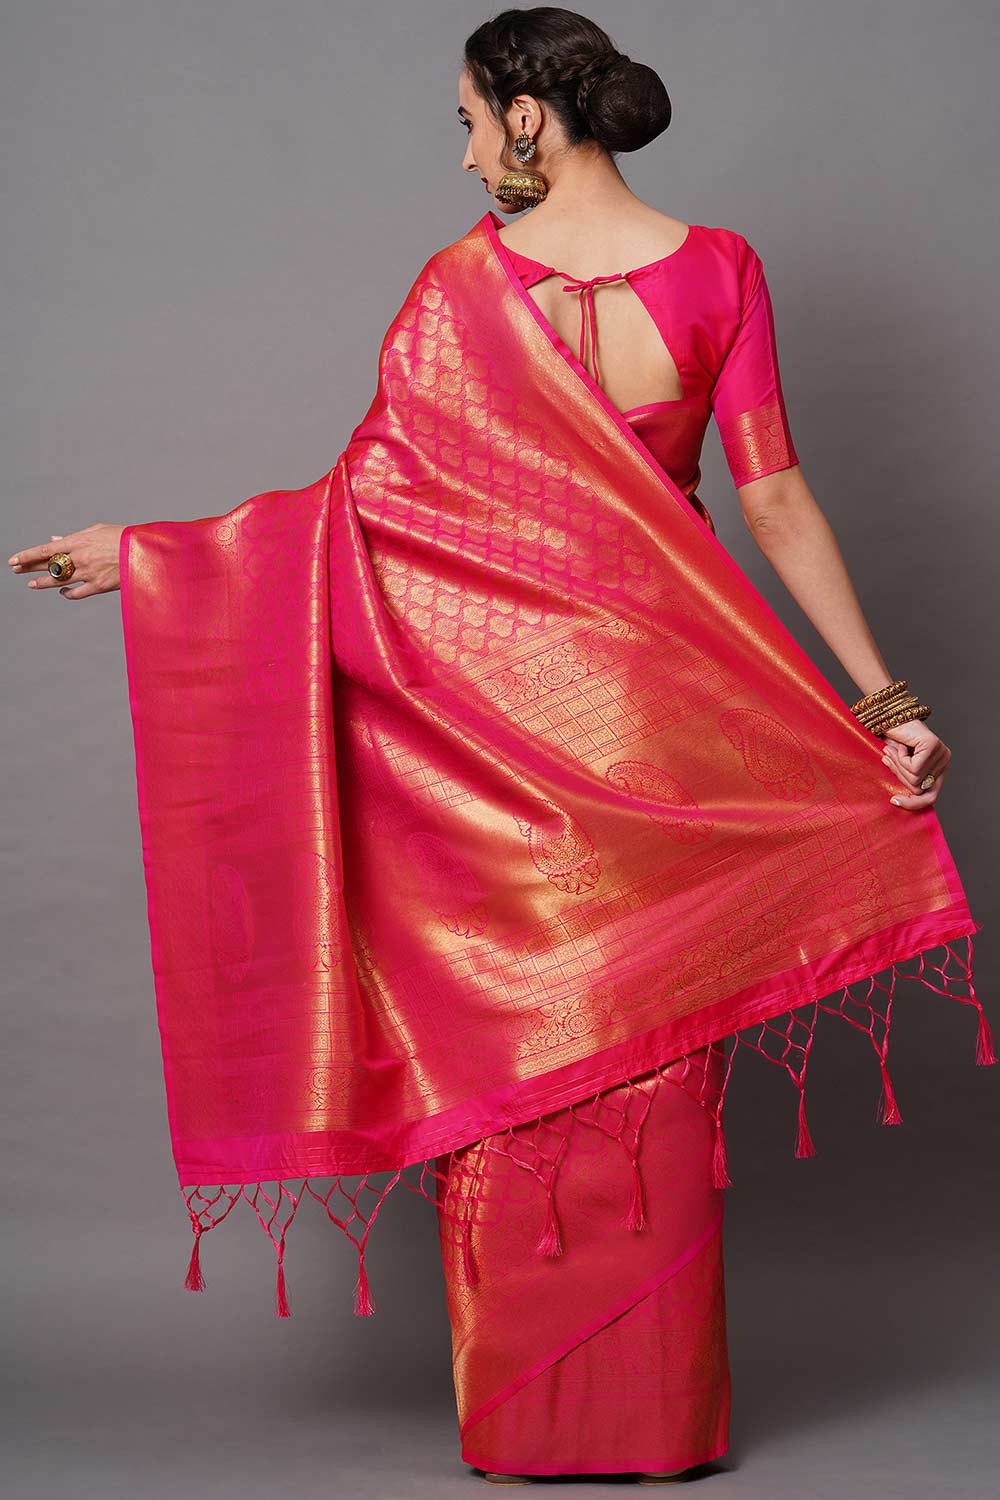 Shop Meena Pink Zari Woven Blended Silk One Minute Saree at best offer at our  Store - One Minute Saree